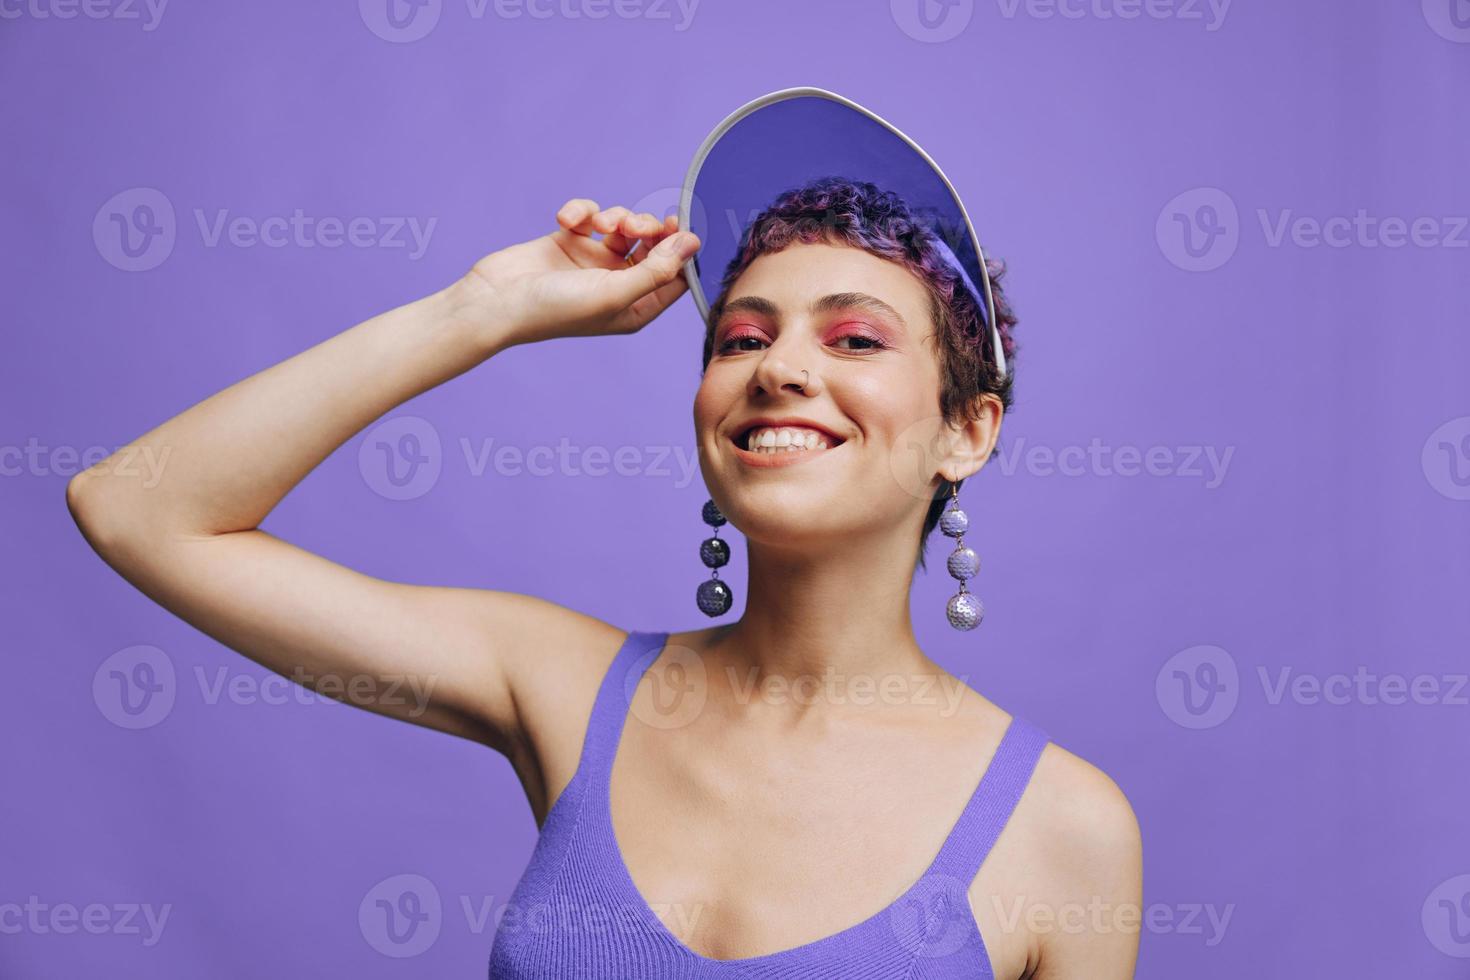 Fashion woman in bright purple sportswear portrait smiling and looking at camera on purple background and smiling photo